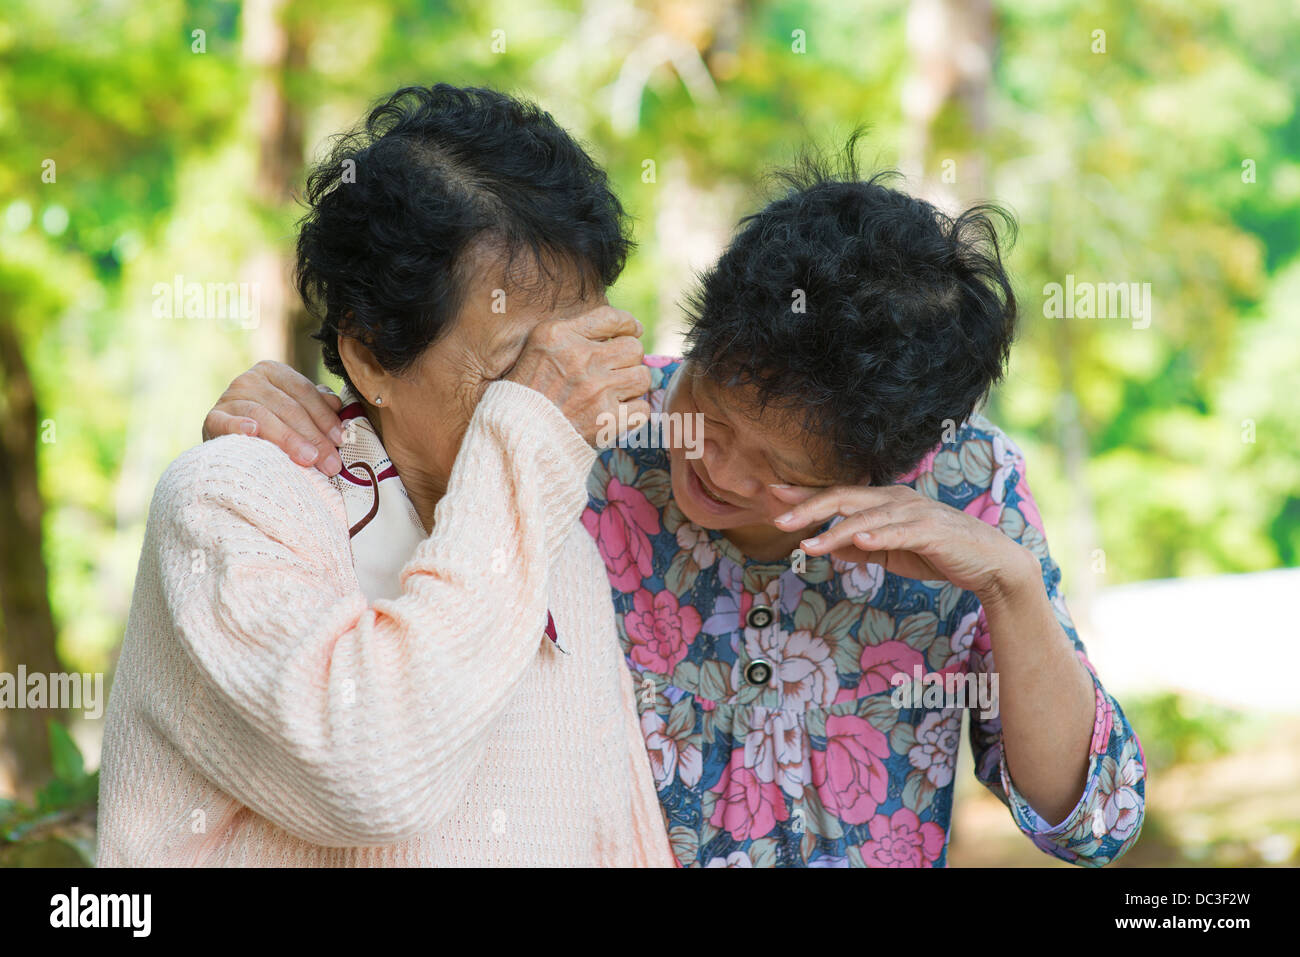 Sad senior Asian women in grieving the loss of a loved one. Outdoor park. Stock Photo